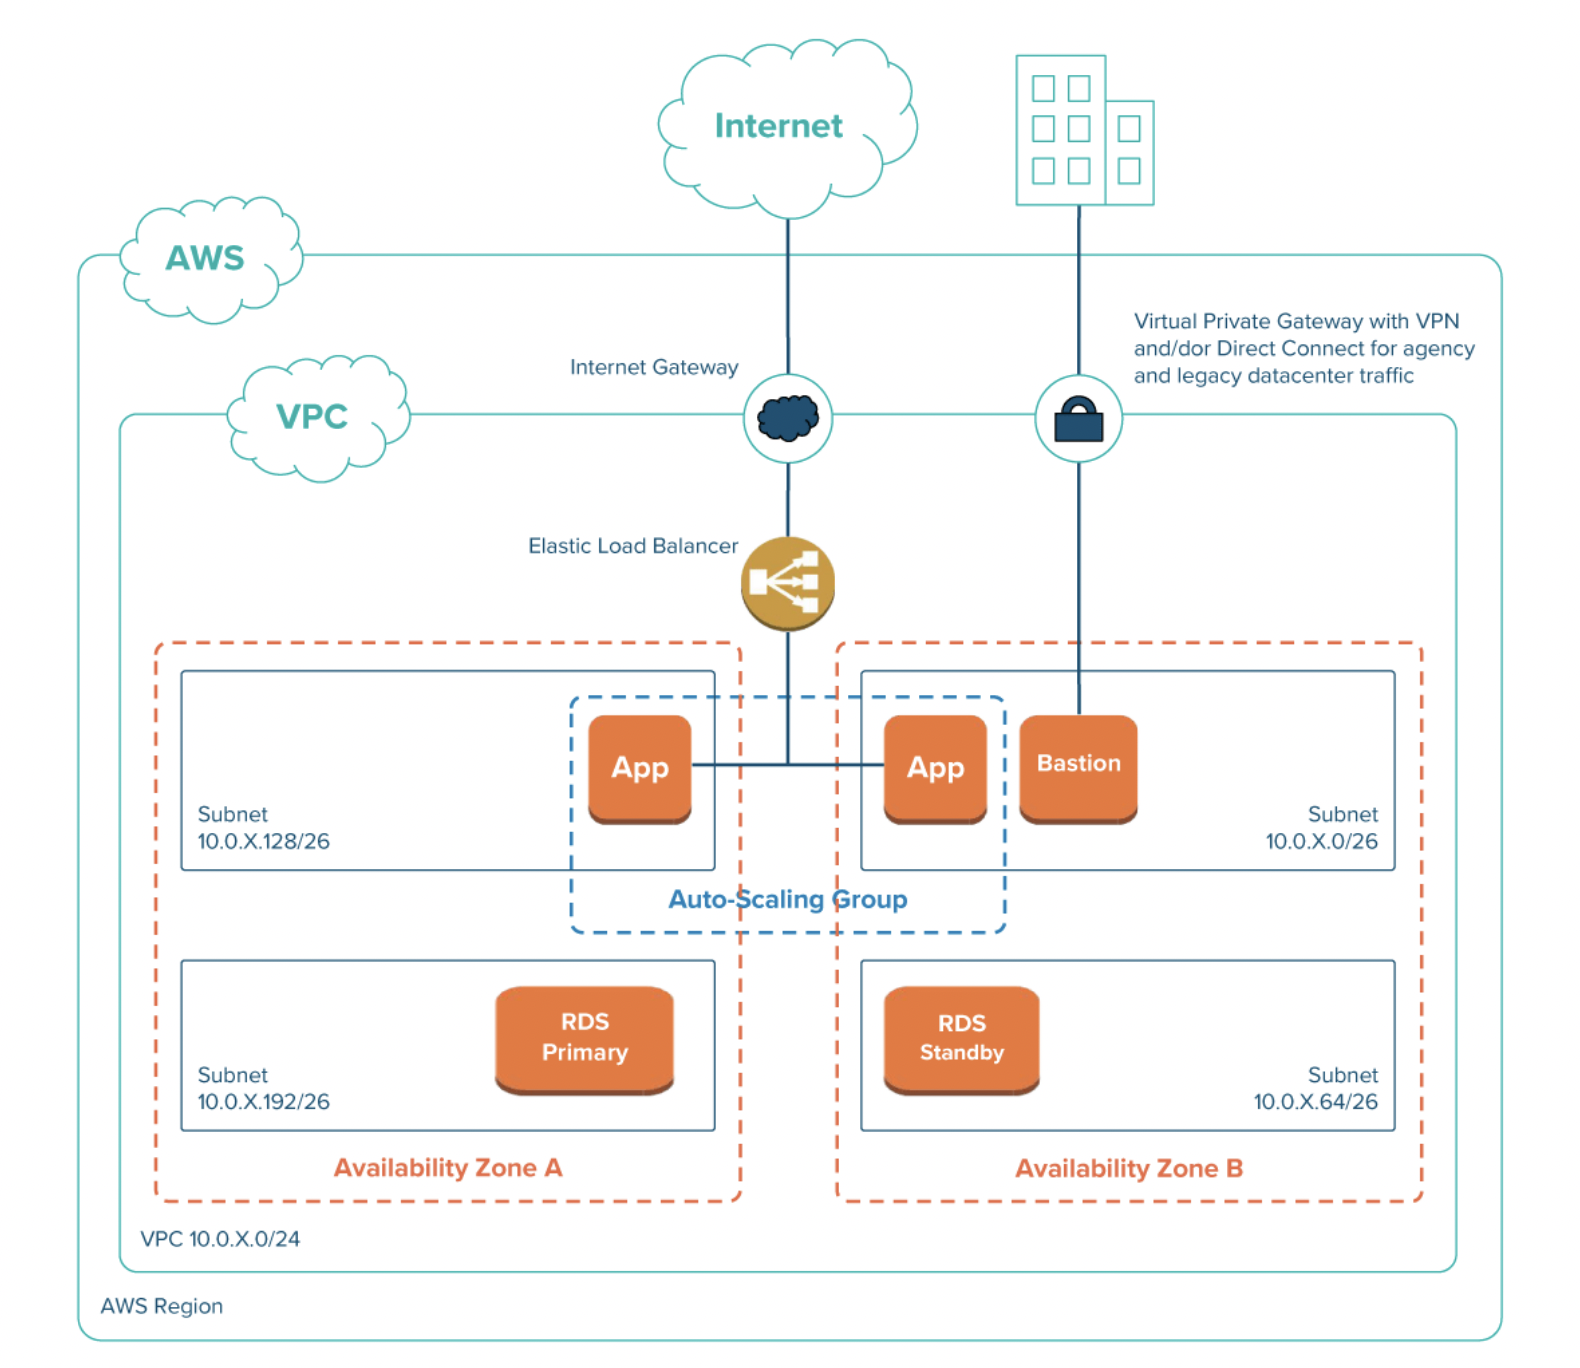 This chart demonstrates a potential network diagram, including an AWS region, VPC region, and auto-scaling group.